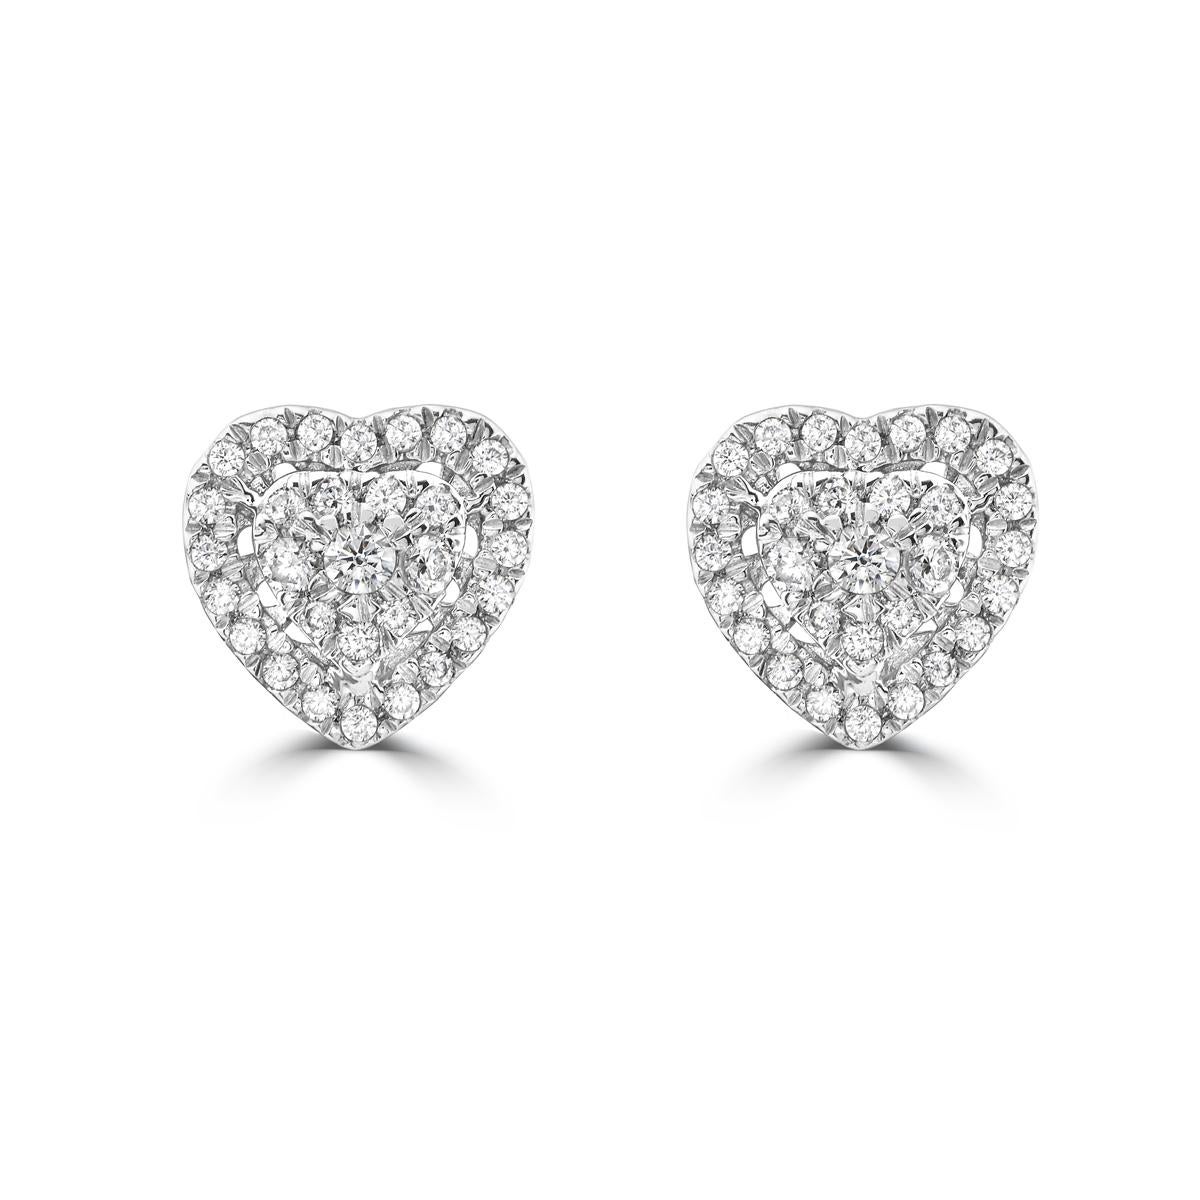 Indulge in the elegance of our Diamond Cluster Heart Stud Earrings. Featuring a stunning heart design, these 14k white gold earrings are perfect for everyday wear. The diamond cluster adds a touch of sparkle, making them the ultimate everyday